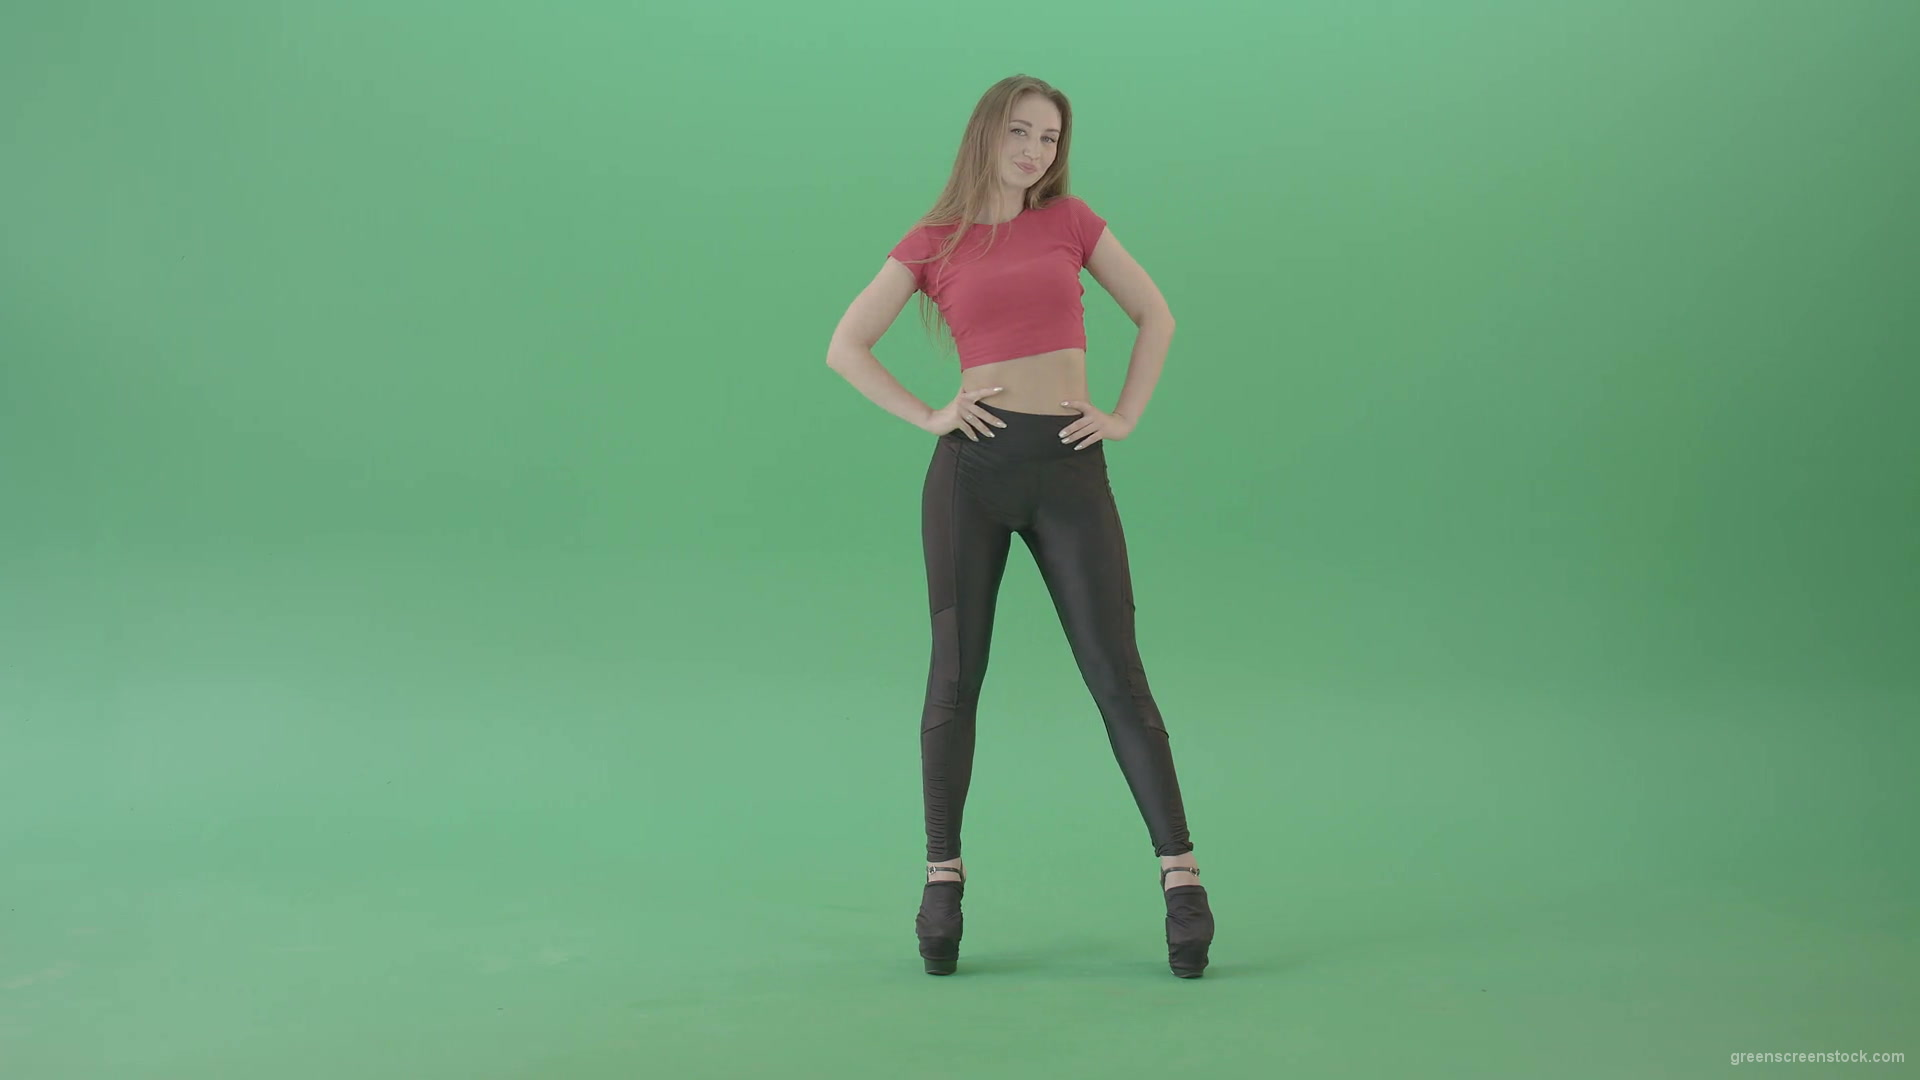 Advertising-Girl-posing-in-front-view-full-size-on-green-screen-4K-Video-Footage-1920_005 Green Screen Stock